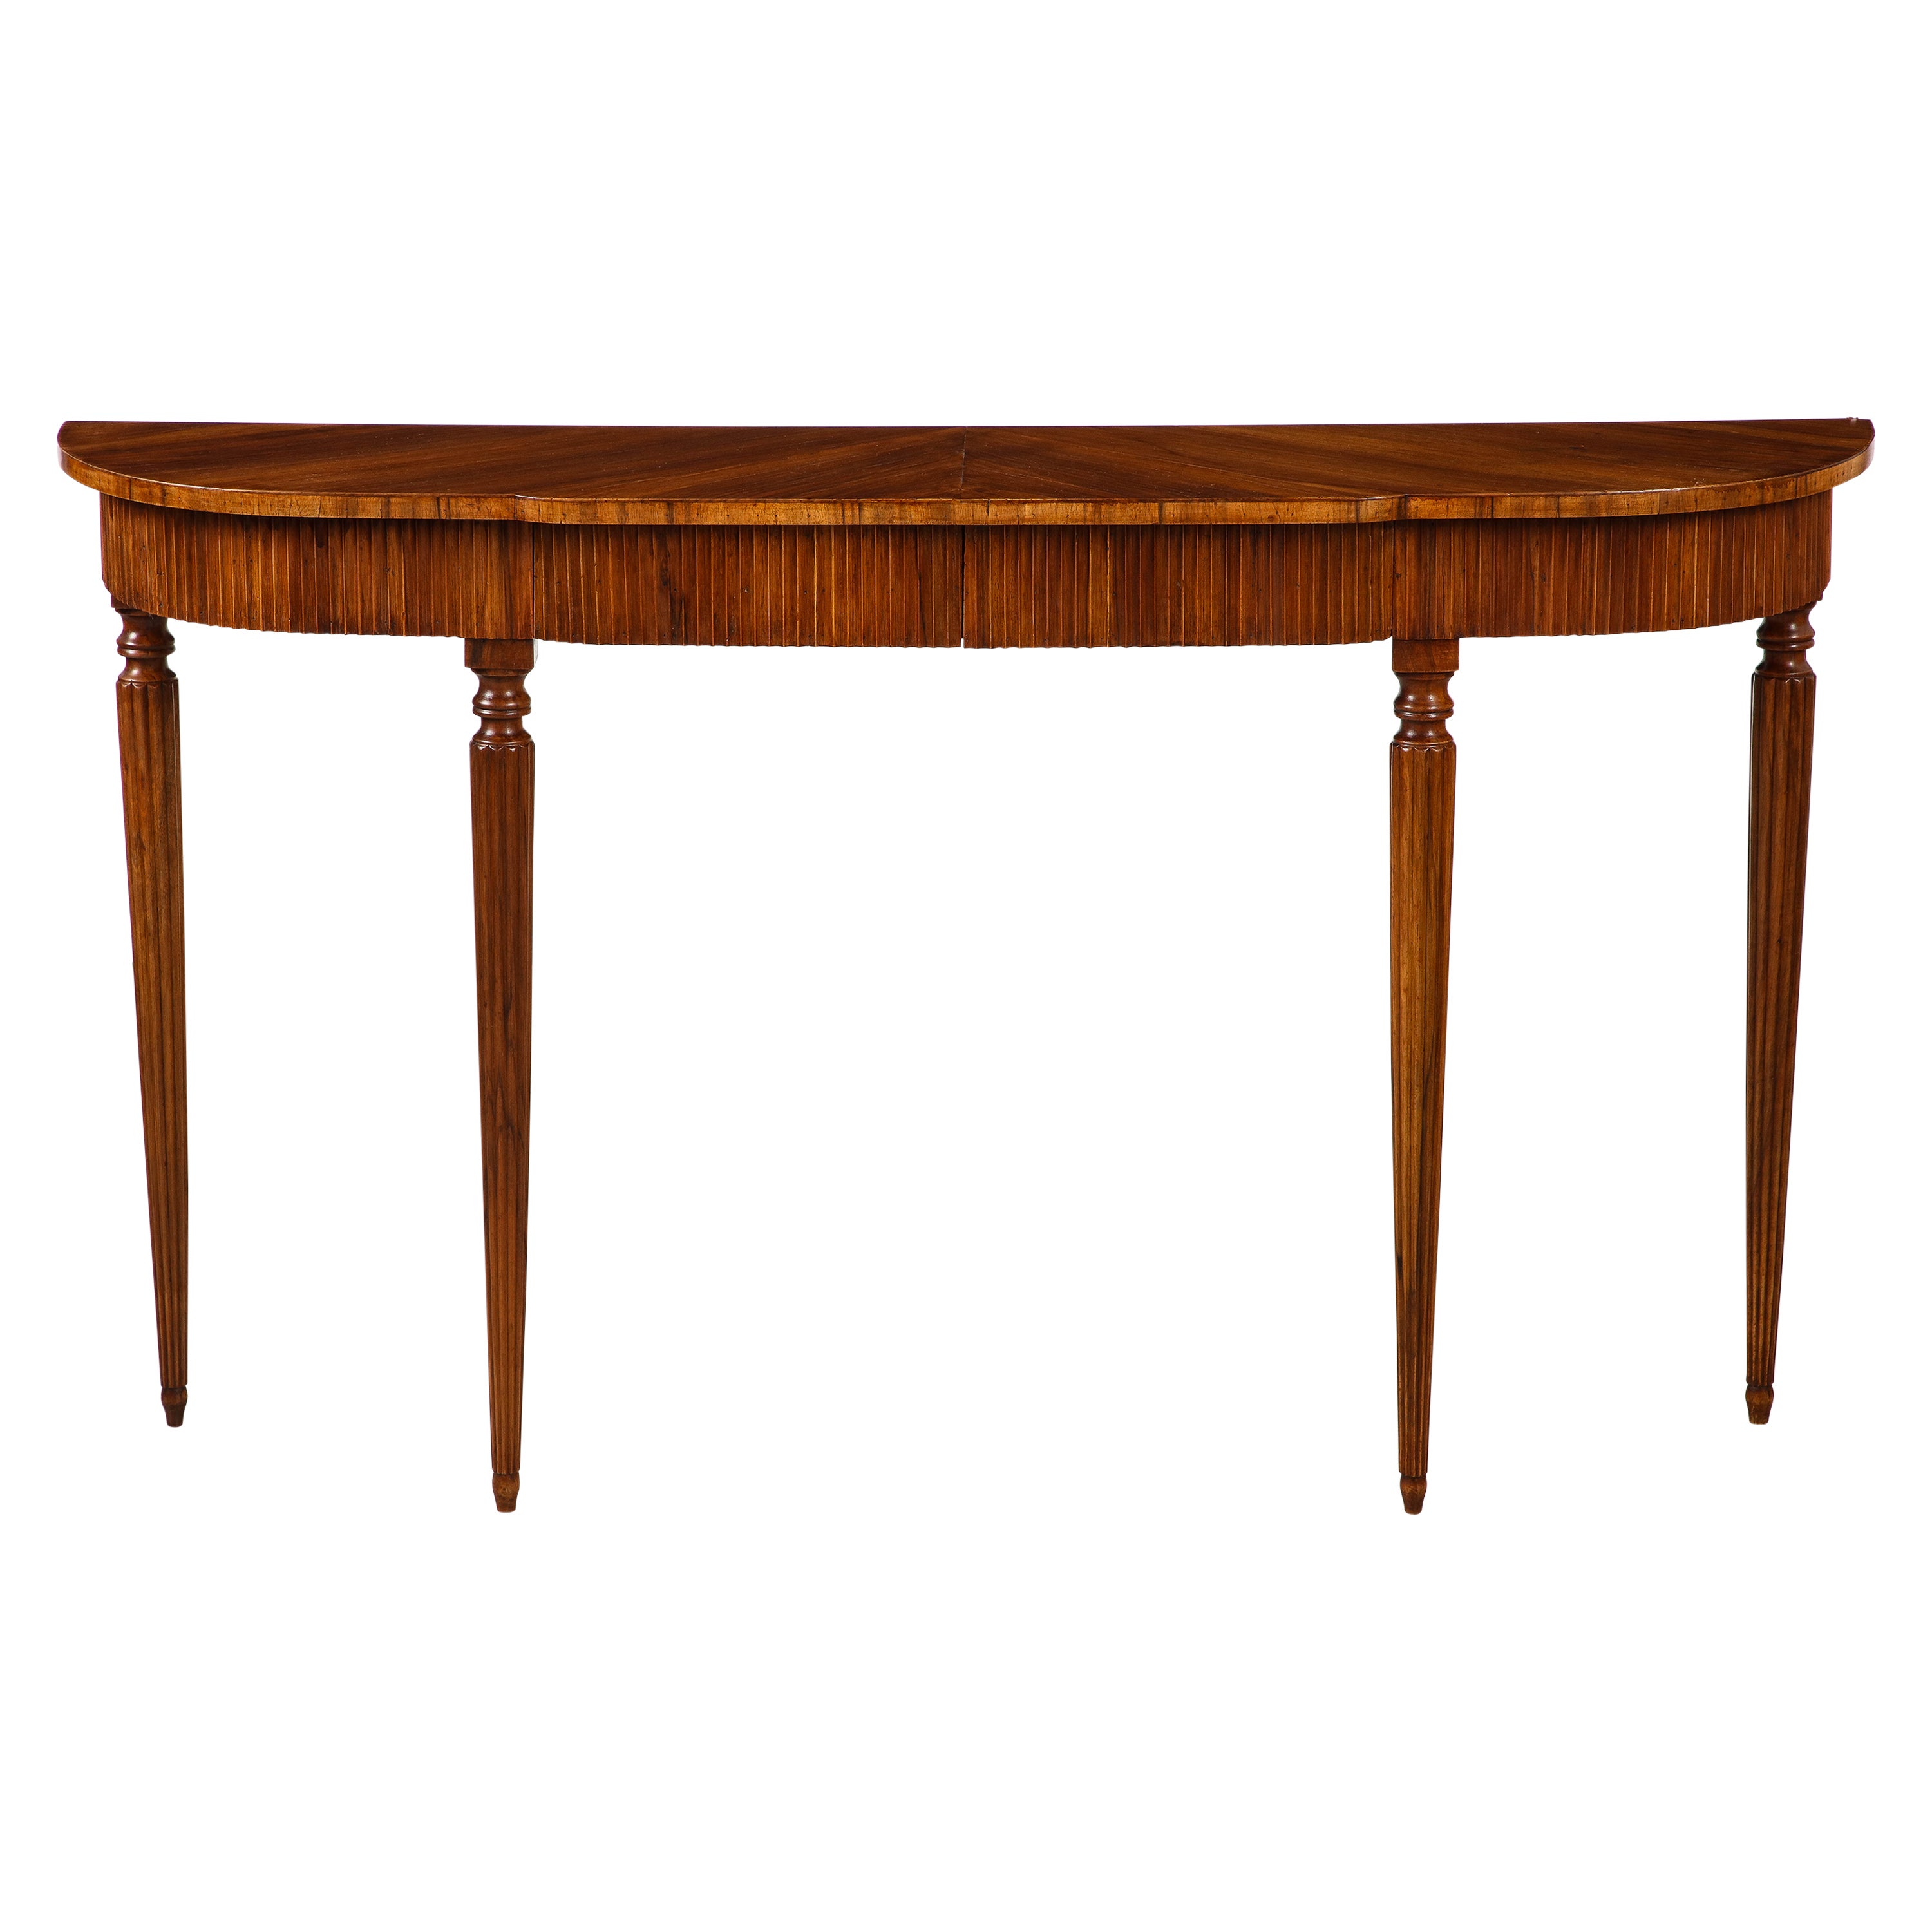 Italian Walnut Carved Console Table with Two Drawers, Italy circa 1930 For Sale